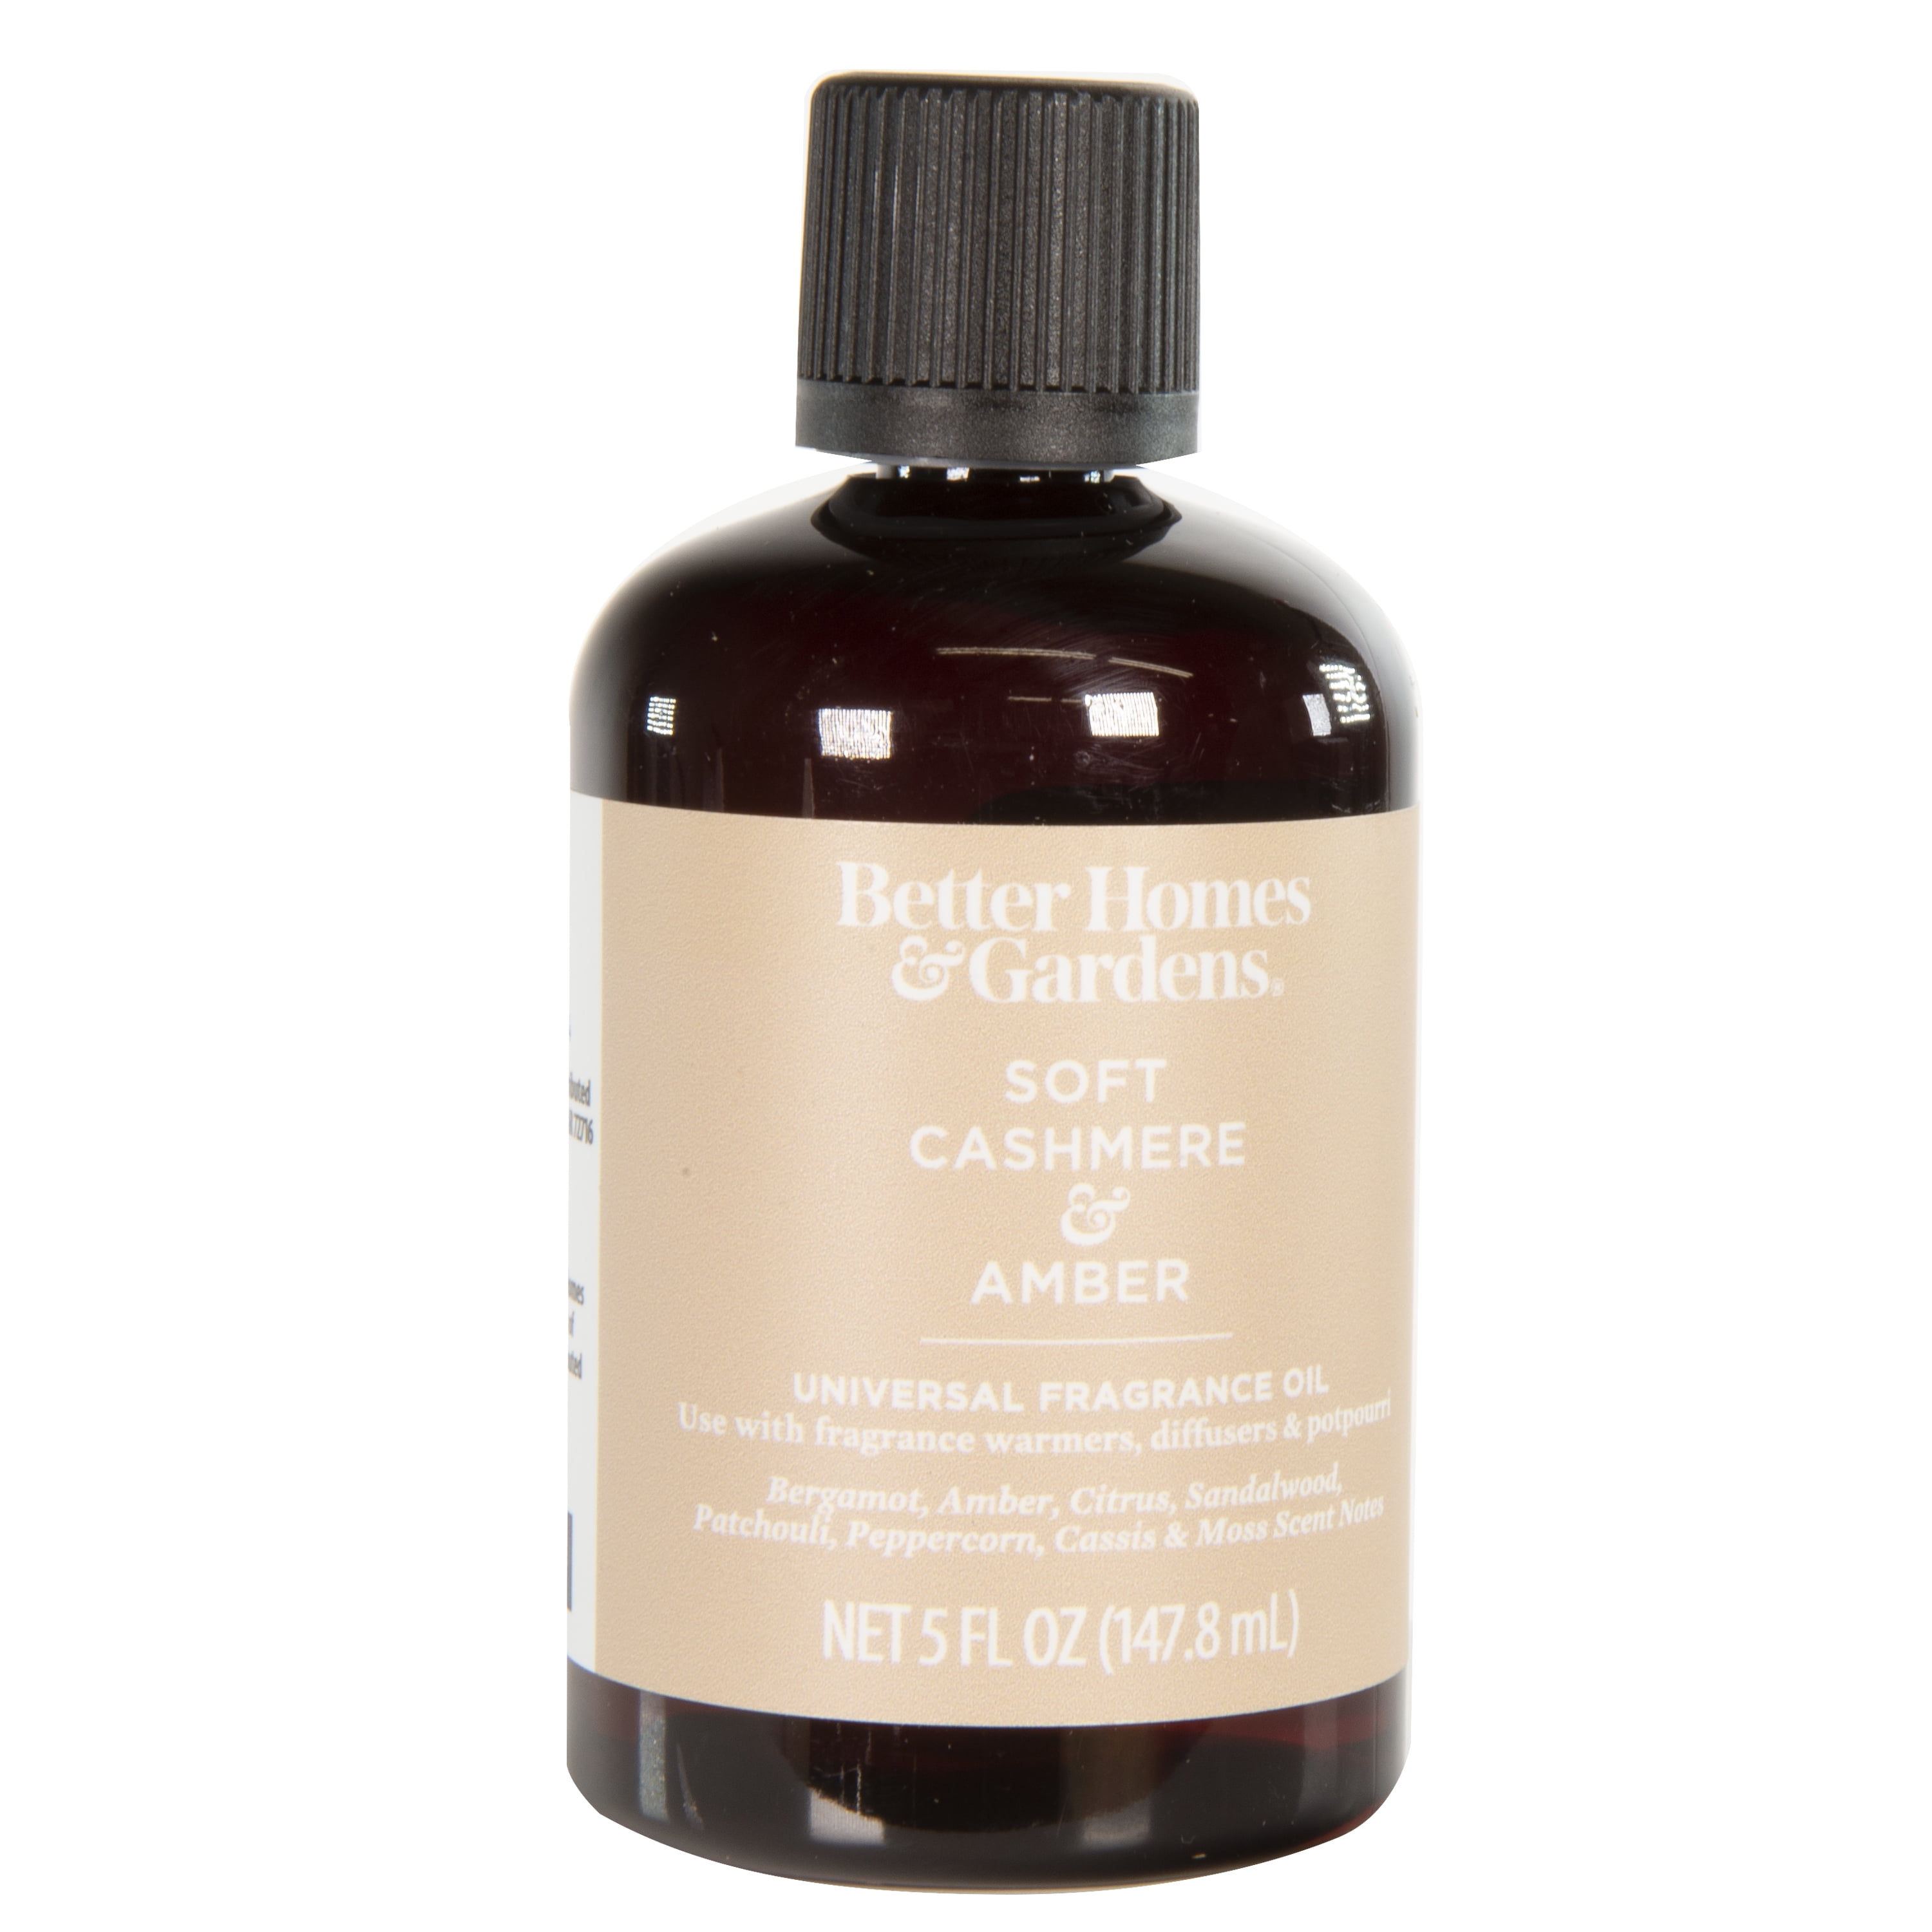 Better Homes & Gardens Universal Fragrance Oil, Soft Cashmere & Amber, 5 fl oz, for use with Fragrance Oil Diffusers, Fragrance Warmers, Potpourri, and Wicking Fragrance Diffusers